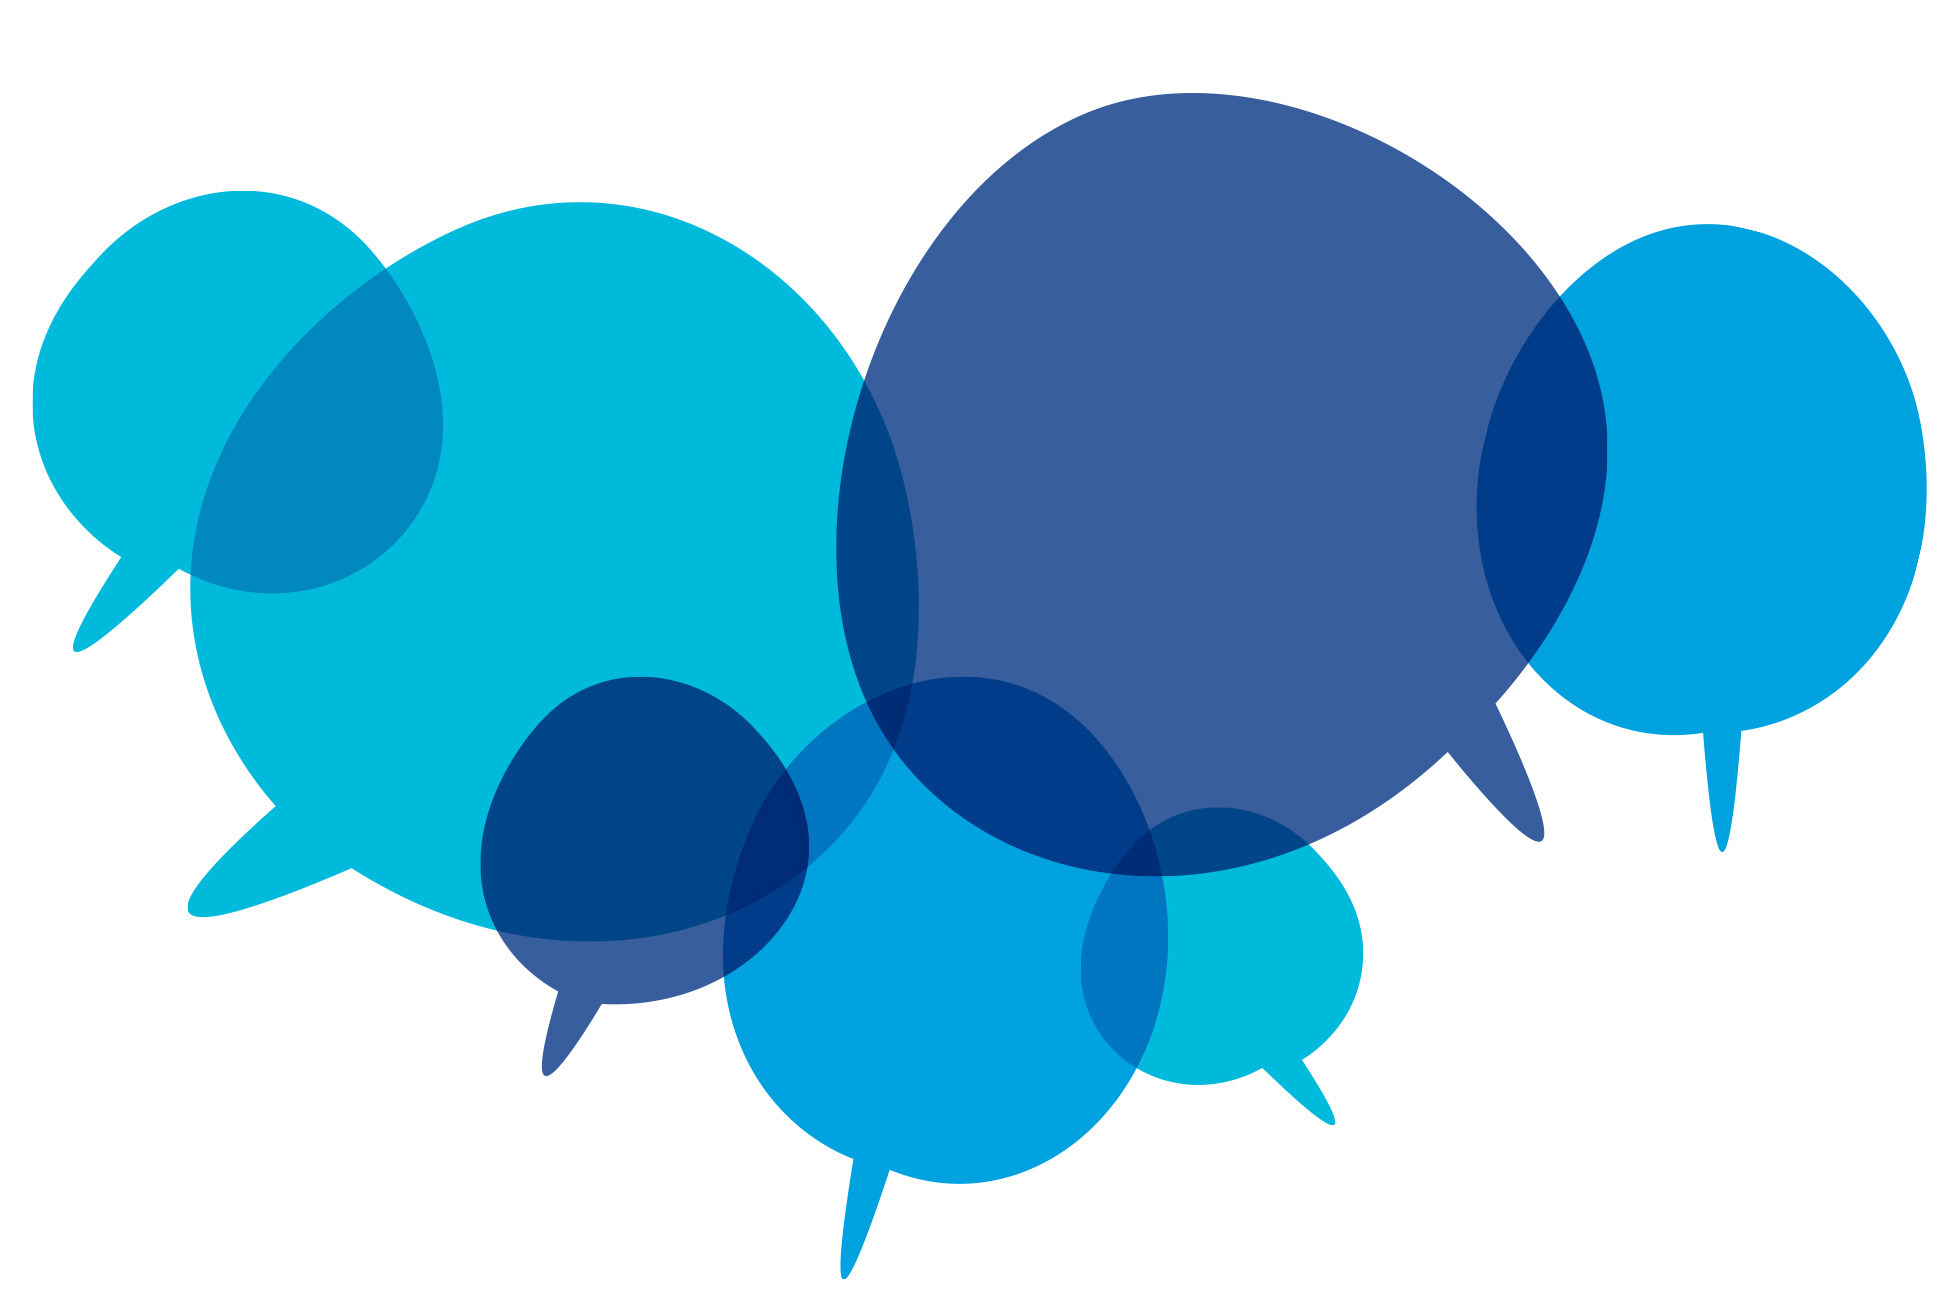 An illustration of a series of overlaid blue speech bubbles.